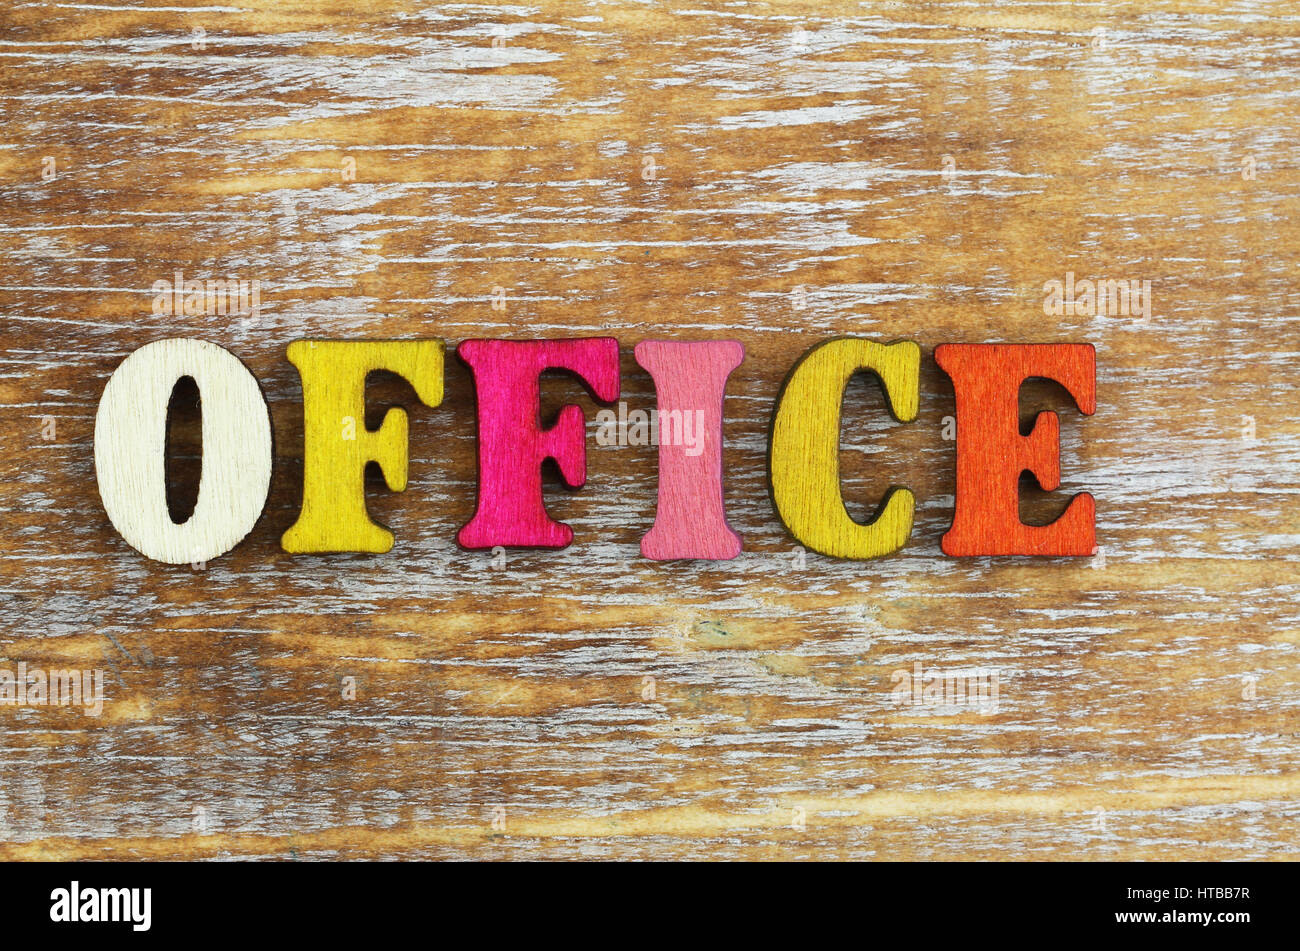 Word office written with colorful wooden letters Stock Photo